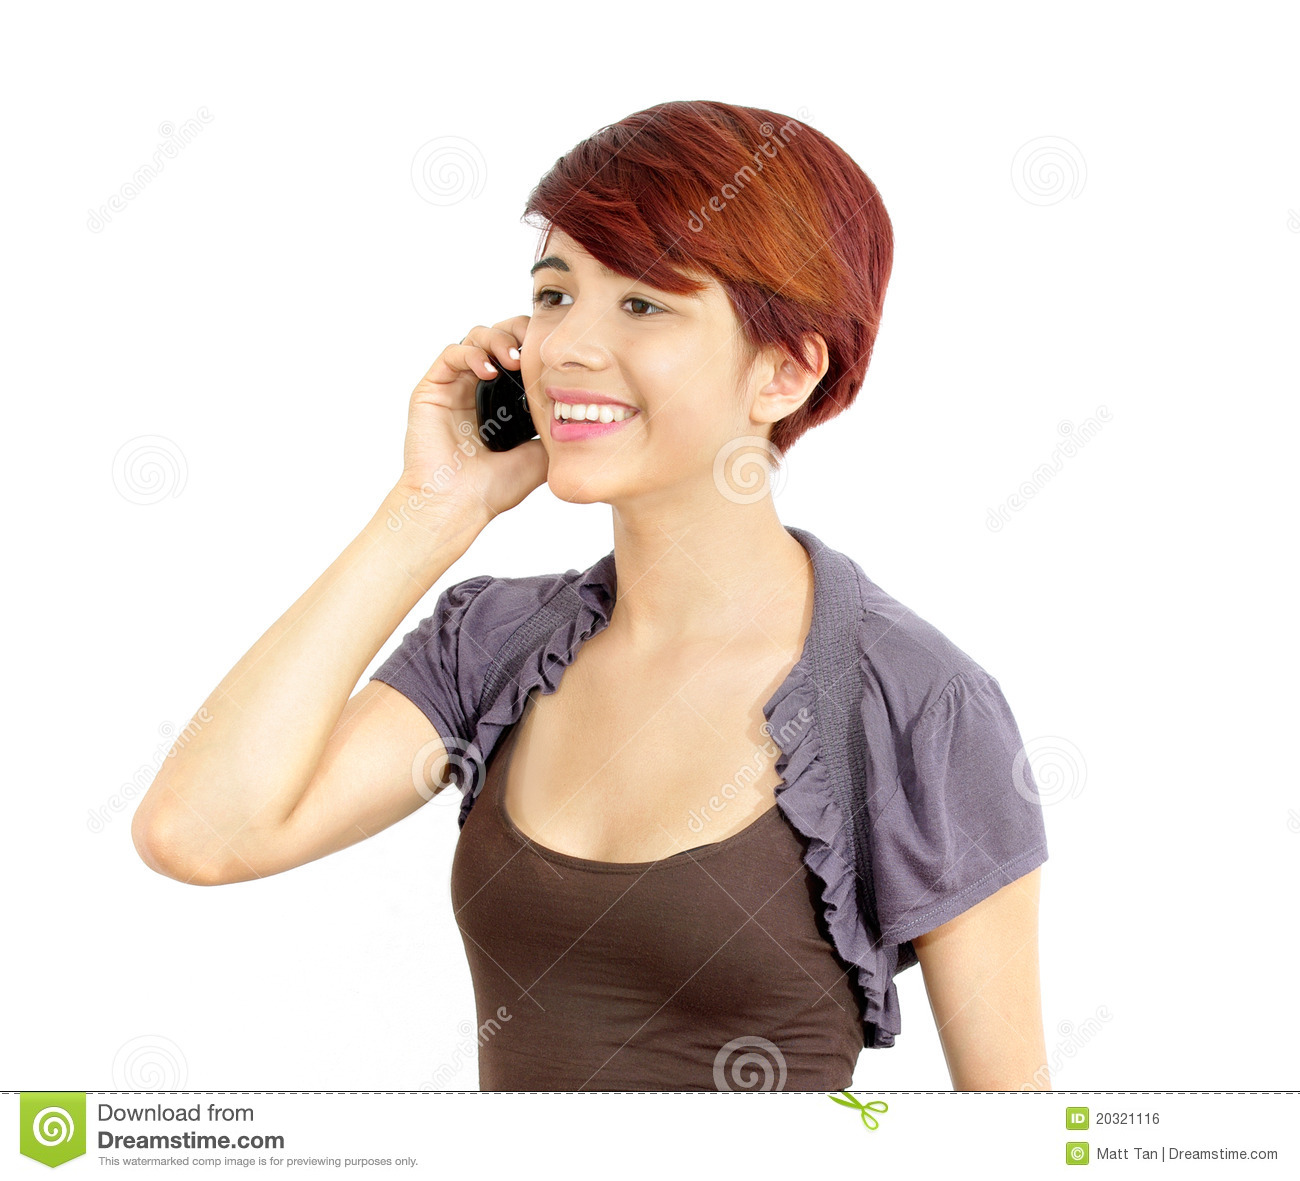 Young Business Lady On Cell Phone Royalty Free Stock Image   Image